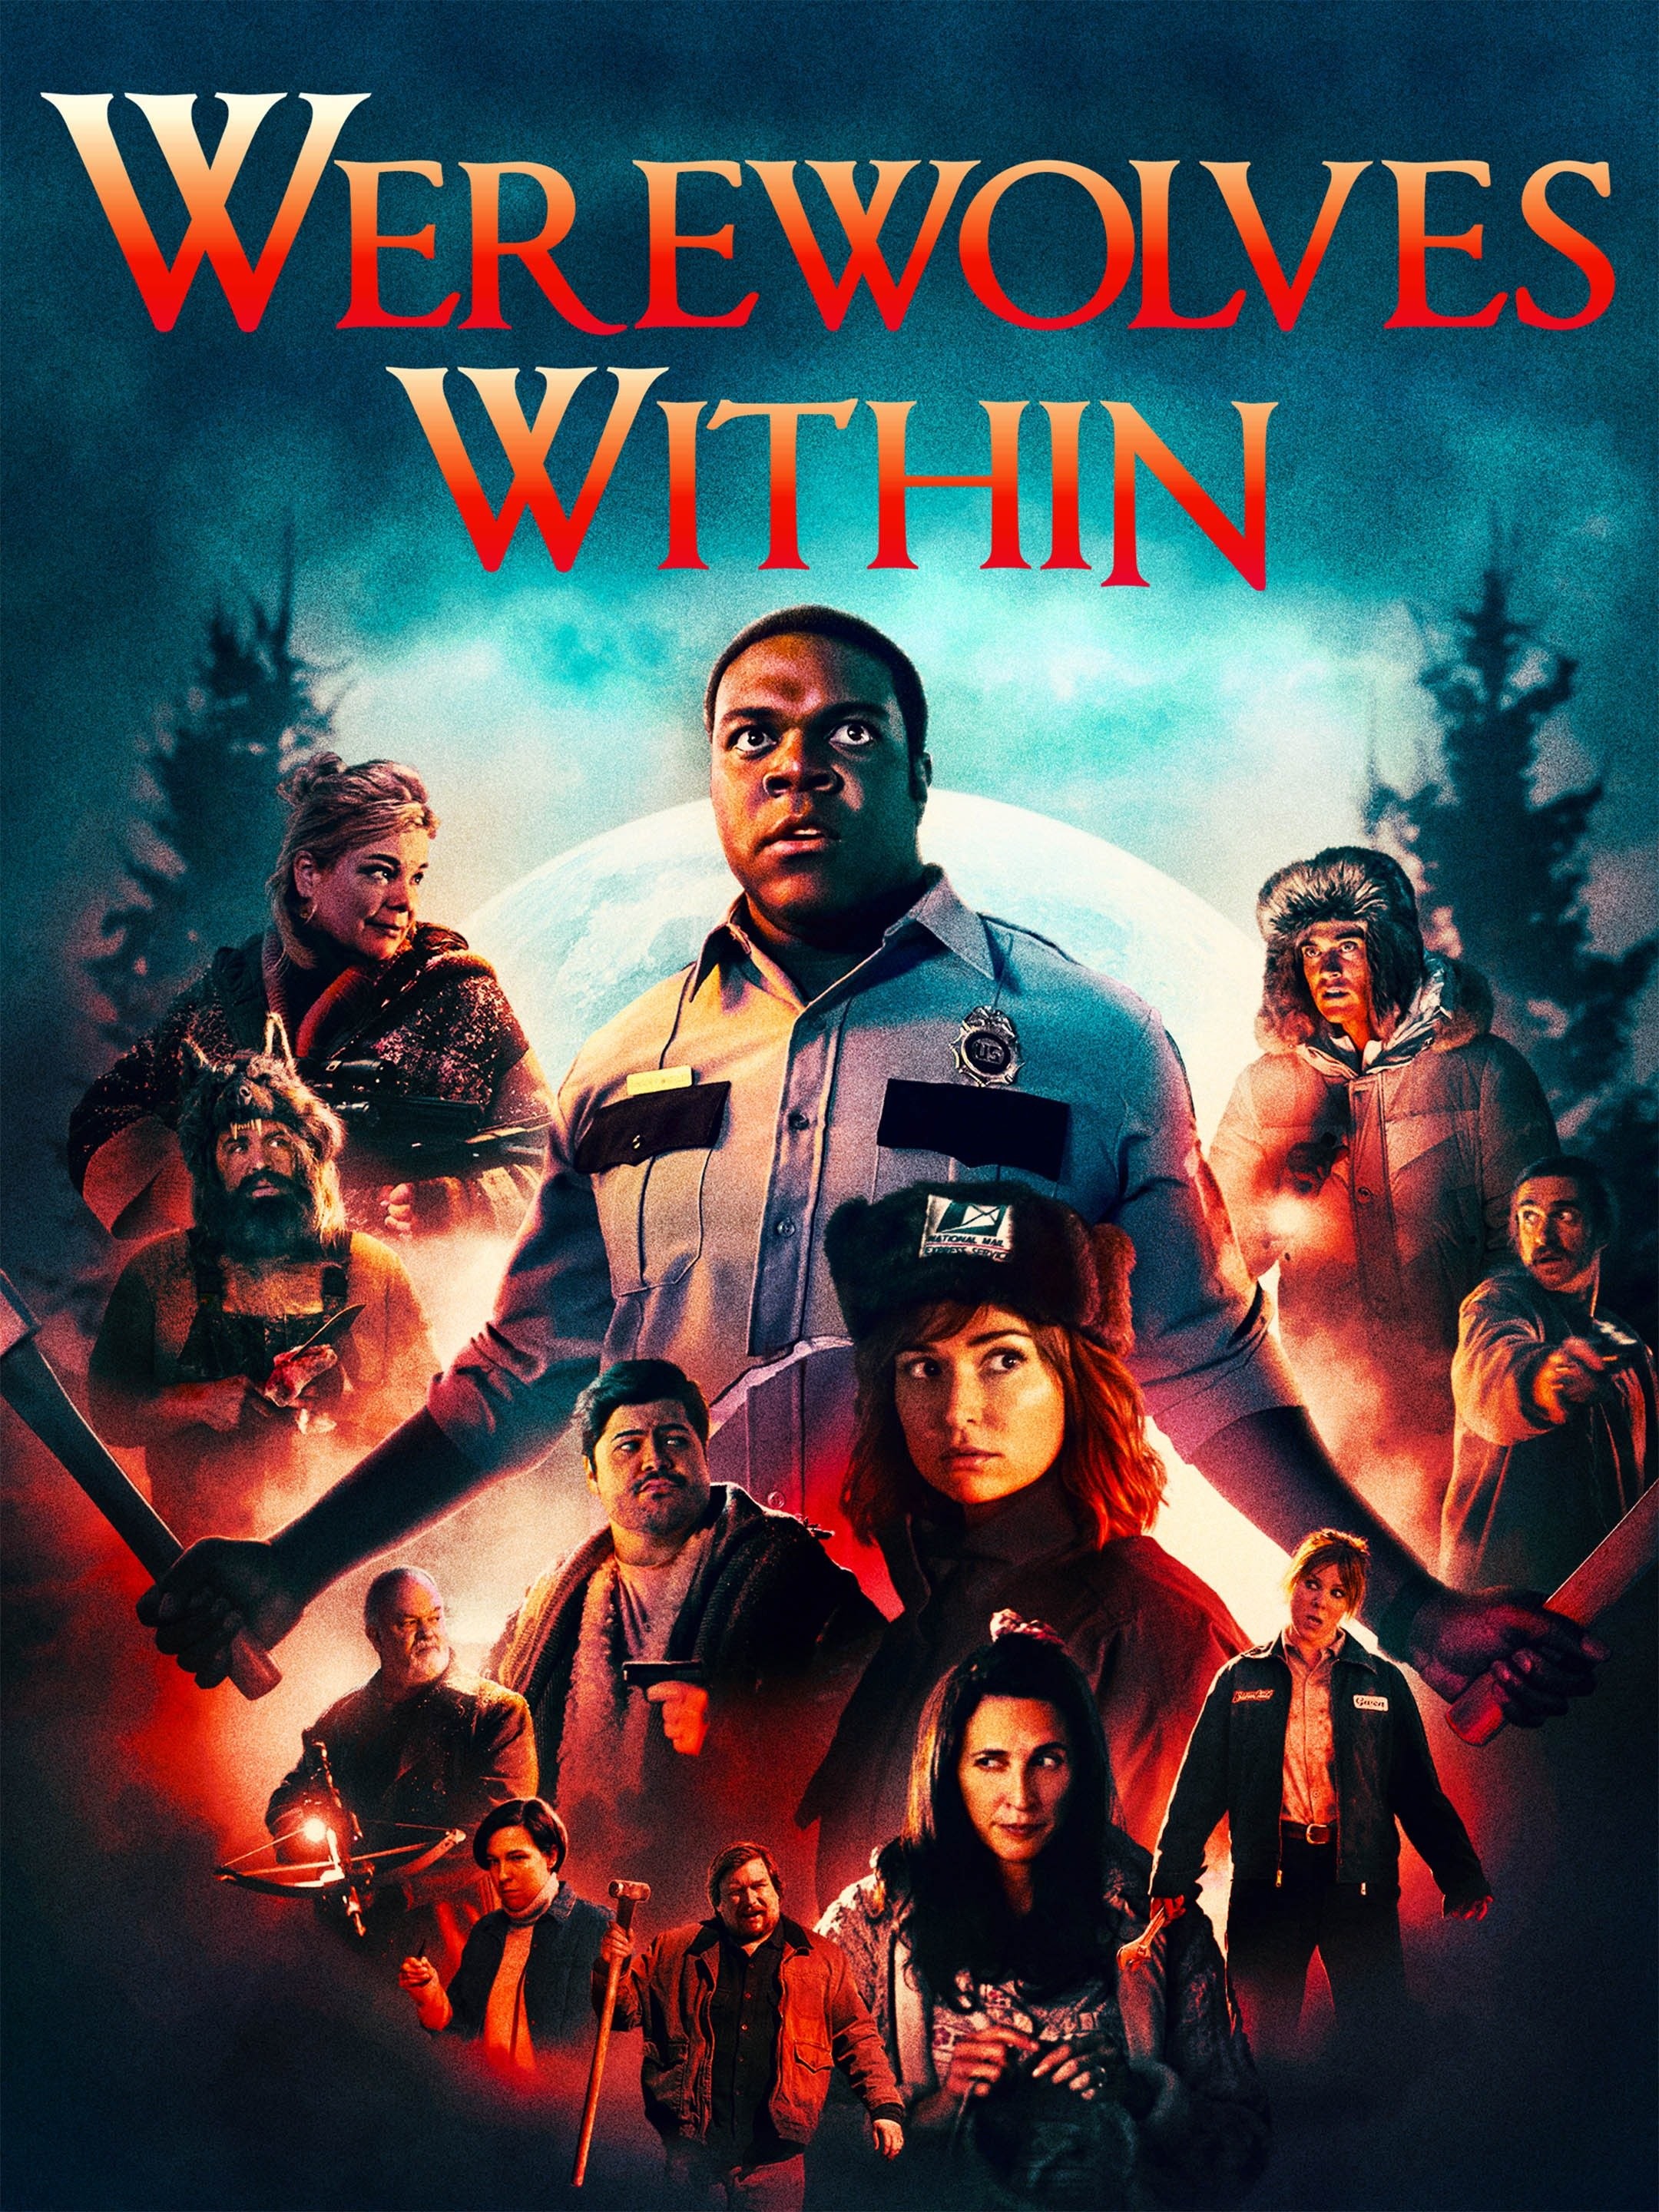 Werewolves Within - Rotten Tomatoes